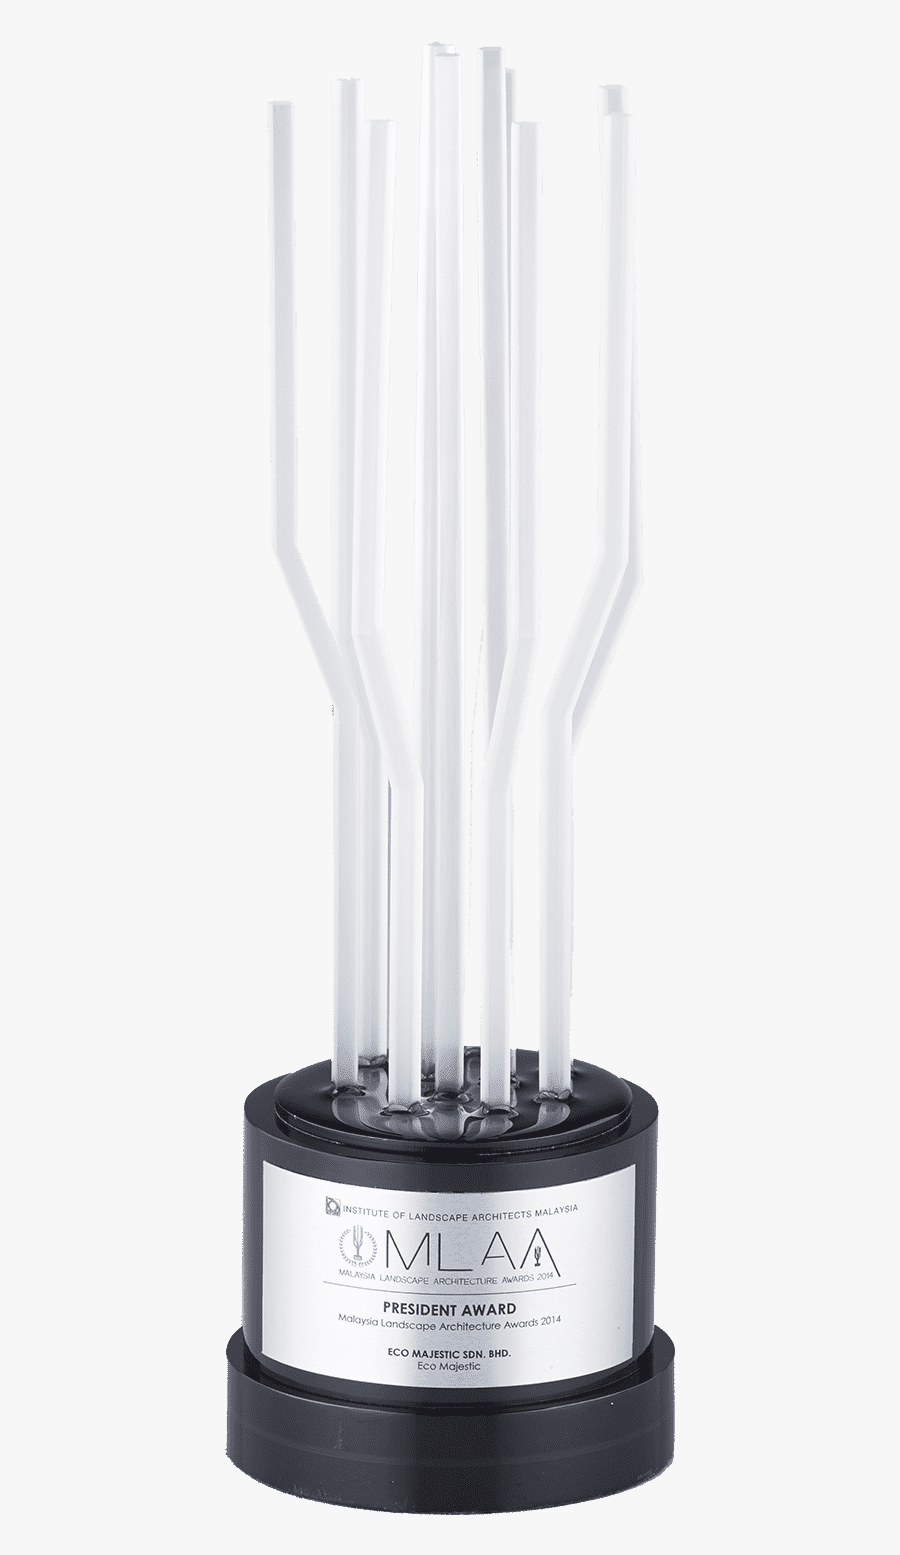 Institute Of Landscape Architects Malaysia Awards - Trophy, Transparent Clipart